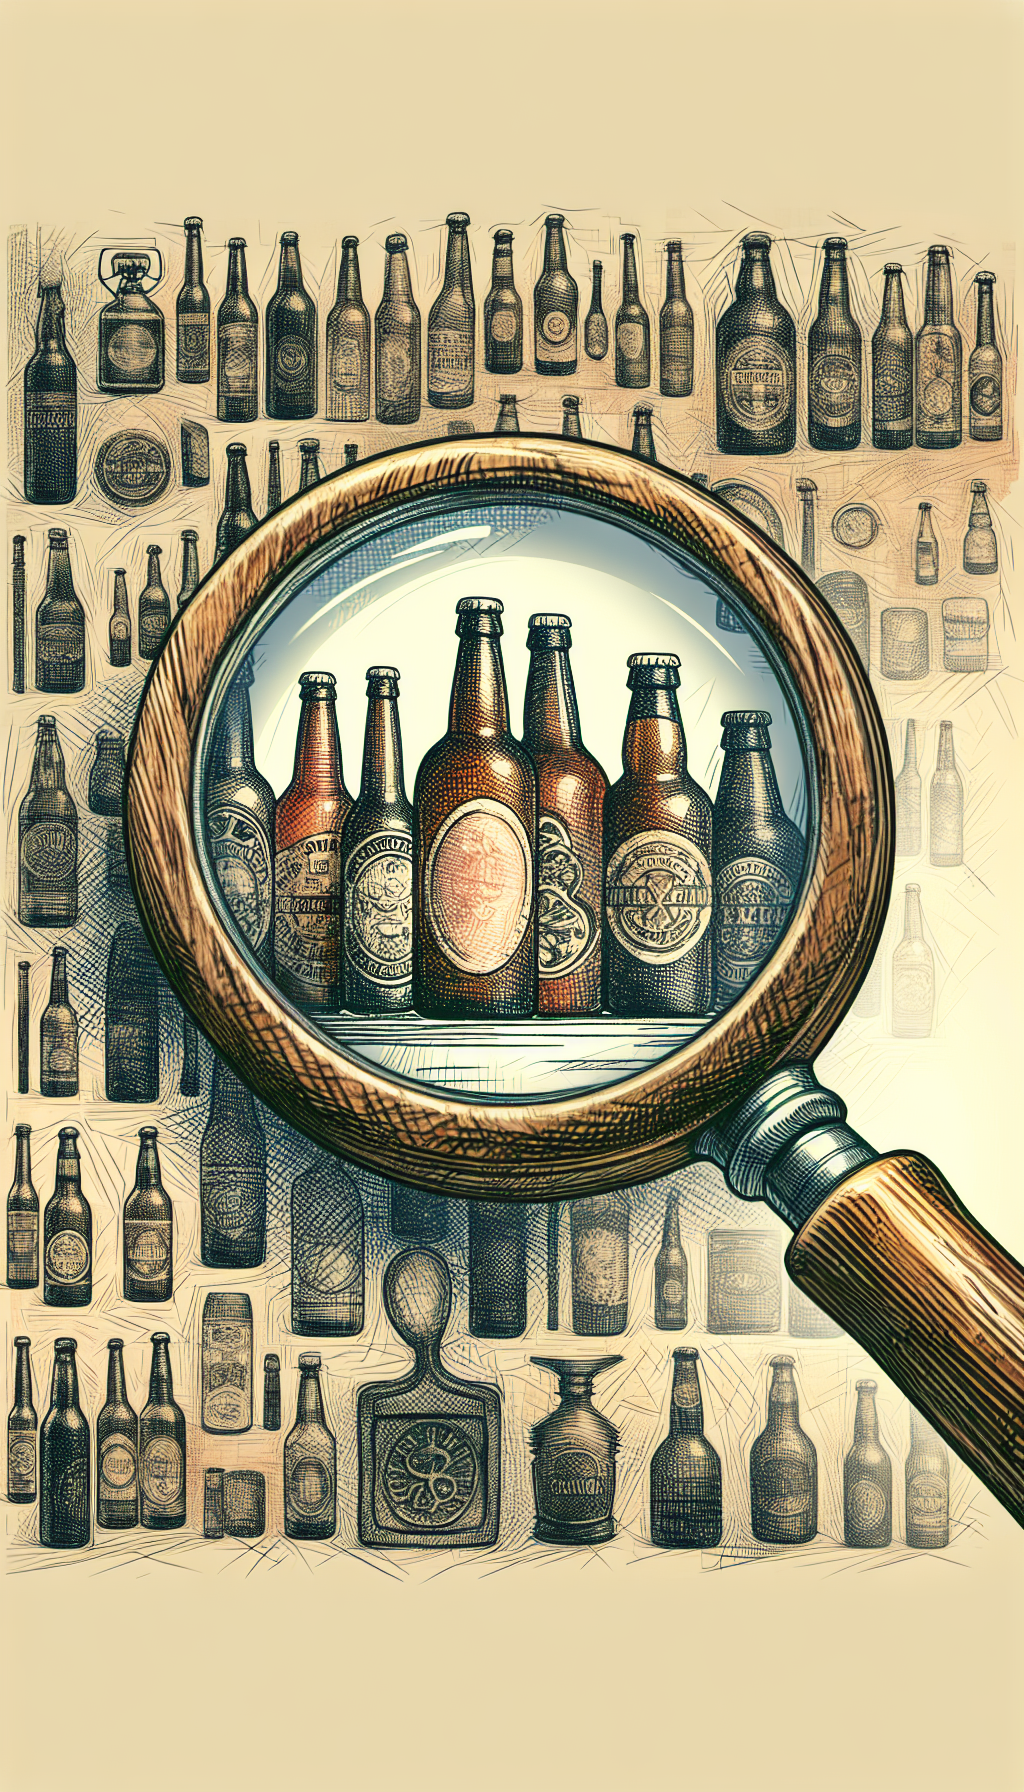 An illustration featuring an antique wooden magnifying glass that overlaps various vintage beer bottles, highlighting their unique marks and embossed logos. The textures range from sketch-like etchings to sepia-toned watercolors, symbolizing a blend of methodologies in old beer bottle identification. The image conveys the process of deciphering the historical codes imprinted on these collectible vessels.